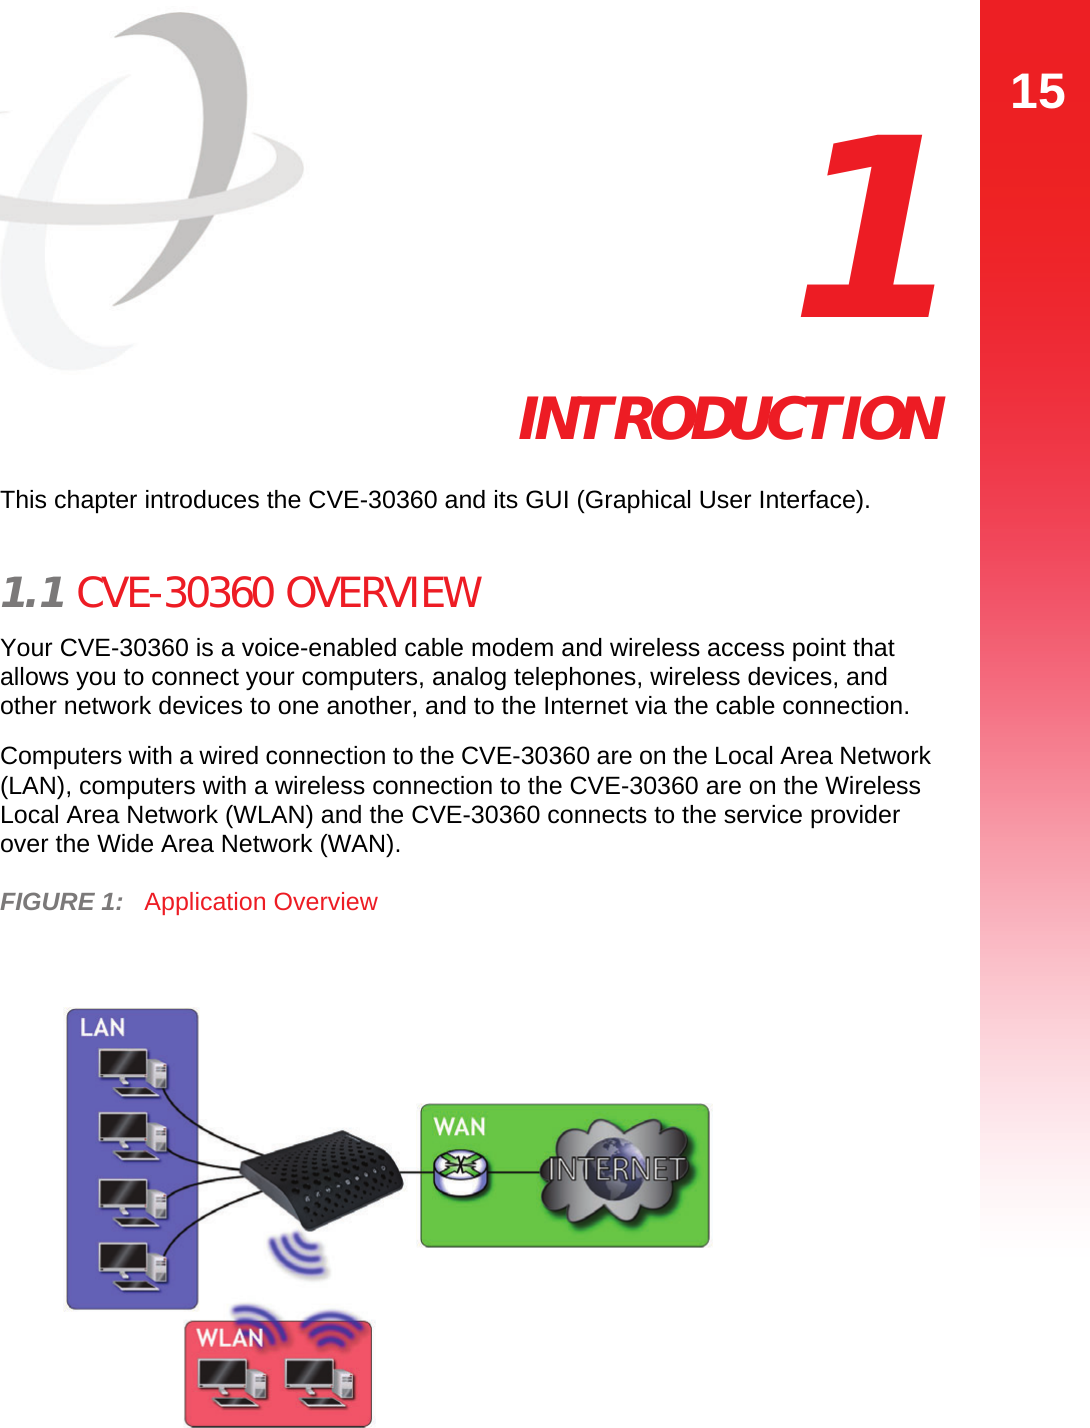 15INTRODUCTION  1 INTRODUCTIONThis chapter introduces the CVE-30360 and its GUI (Graphical User Interface).1.1 CVE-30360 OVERVIEWYour CVE-30360 is a voice-enabled cable modem and wireless access point that allows you to connect your computers, analog telephones, wireless devices, and other network devices to one another, and to the Internet via the cable connection.Computers with a wired connection to the CVE-30360 are on the Local Area Network (LAN), computers with a wireless connection to the CVE-30360 are on the Wireless Local Area Network (WLAN) and the CVE-30360 connects to the service provider over the Wide Area Network (WAN).FIGURE 1:   Application Overview